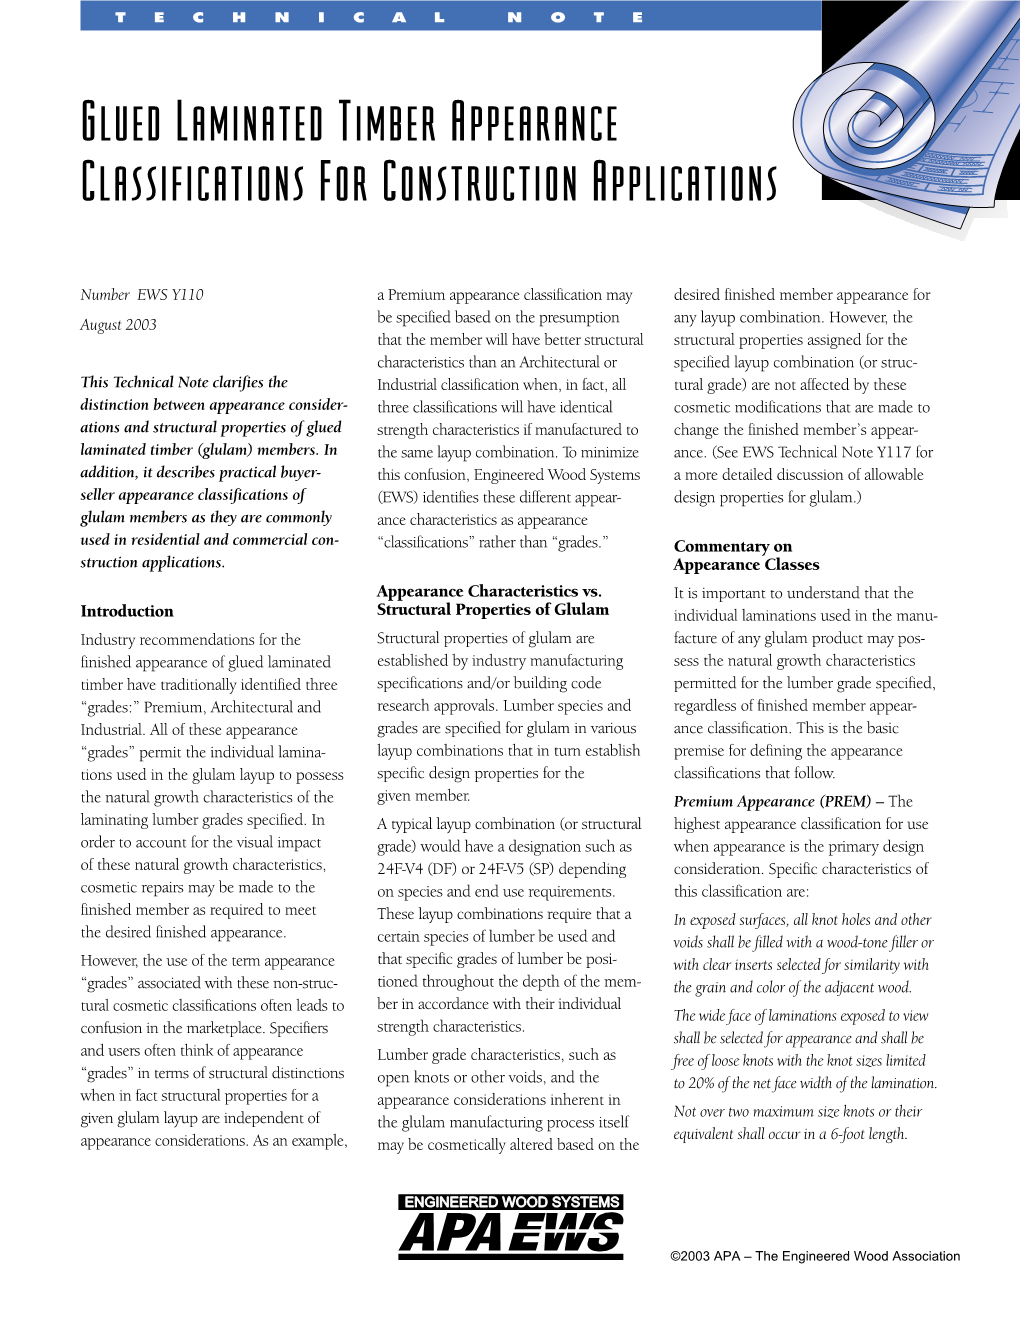 Glued Laminated Timber Appearance Classifications for Construction Applications